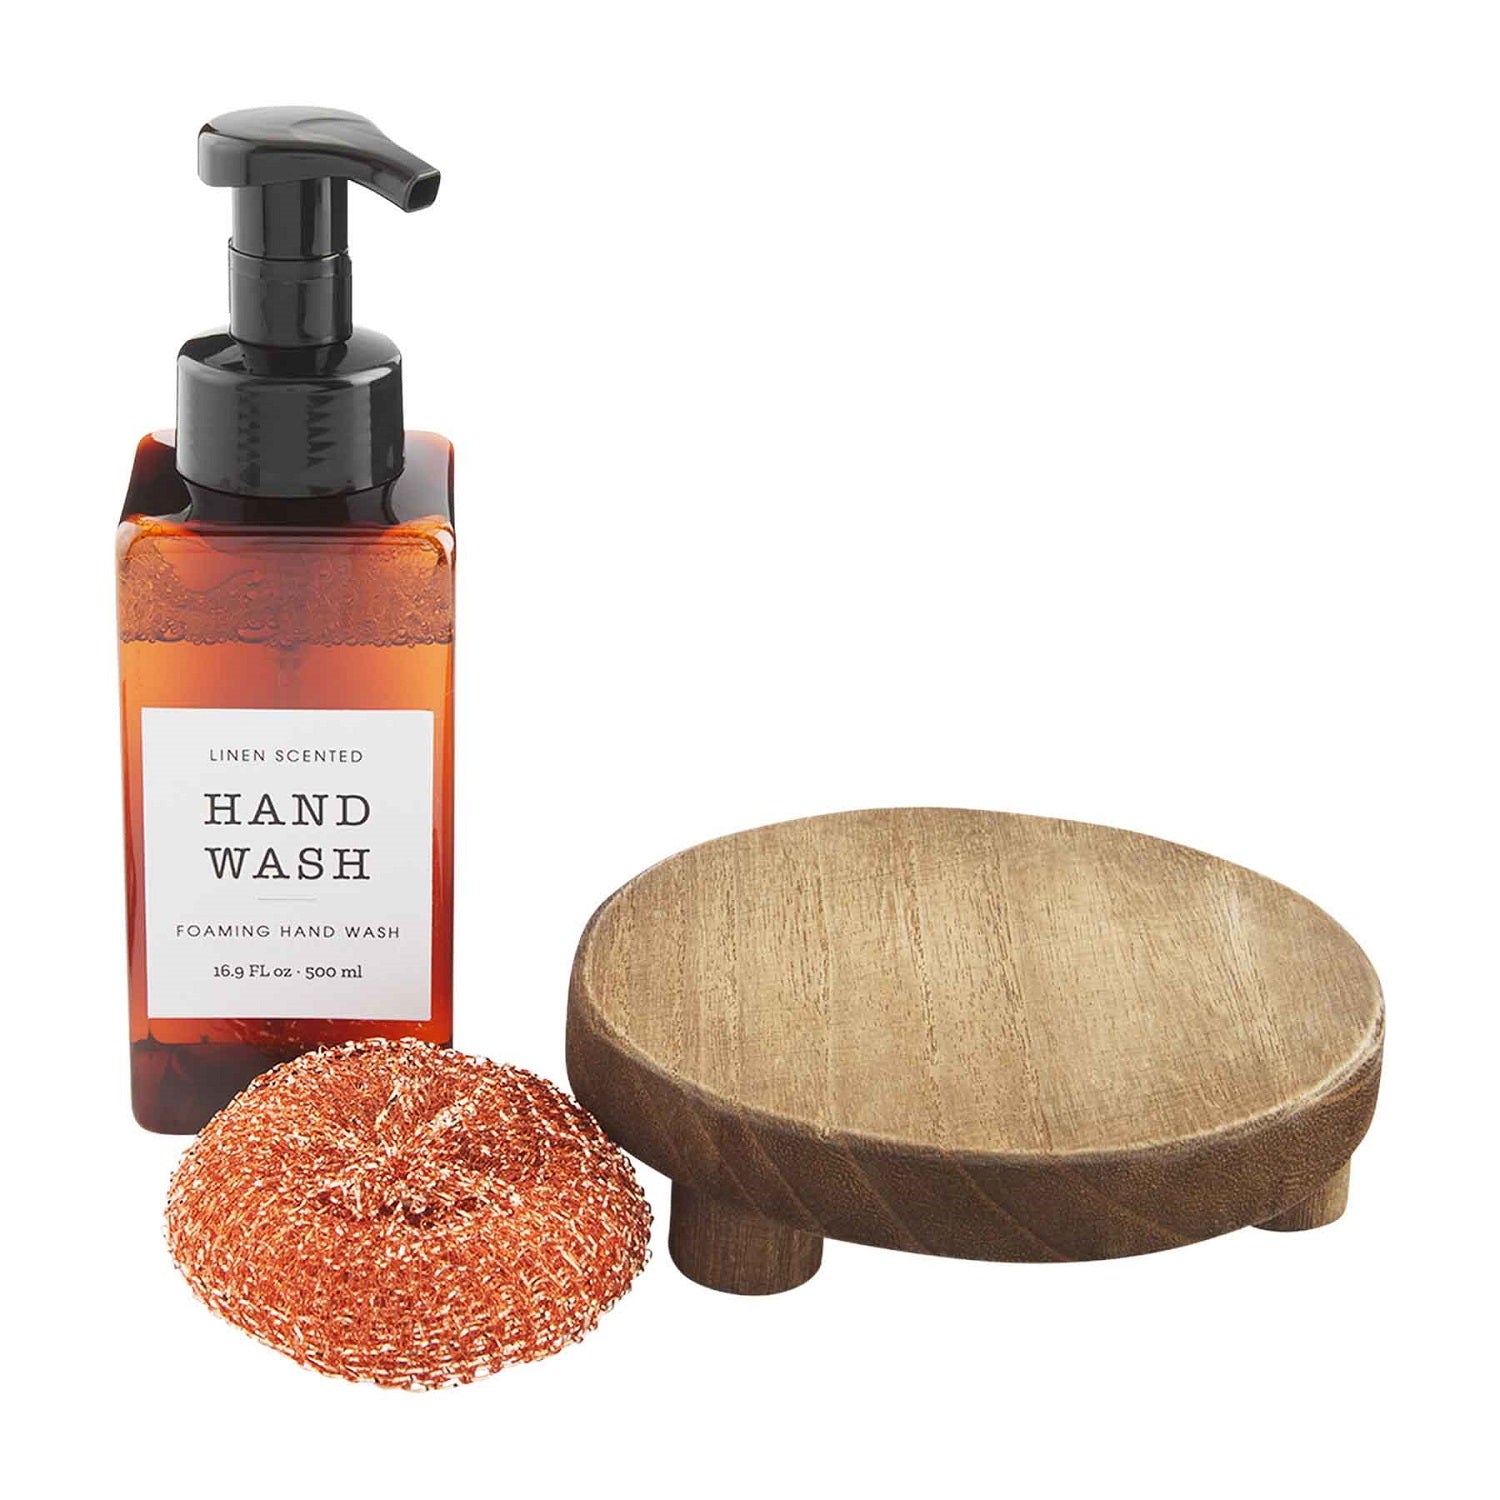 Hand Soap & Scrubber Boxed Set